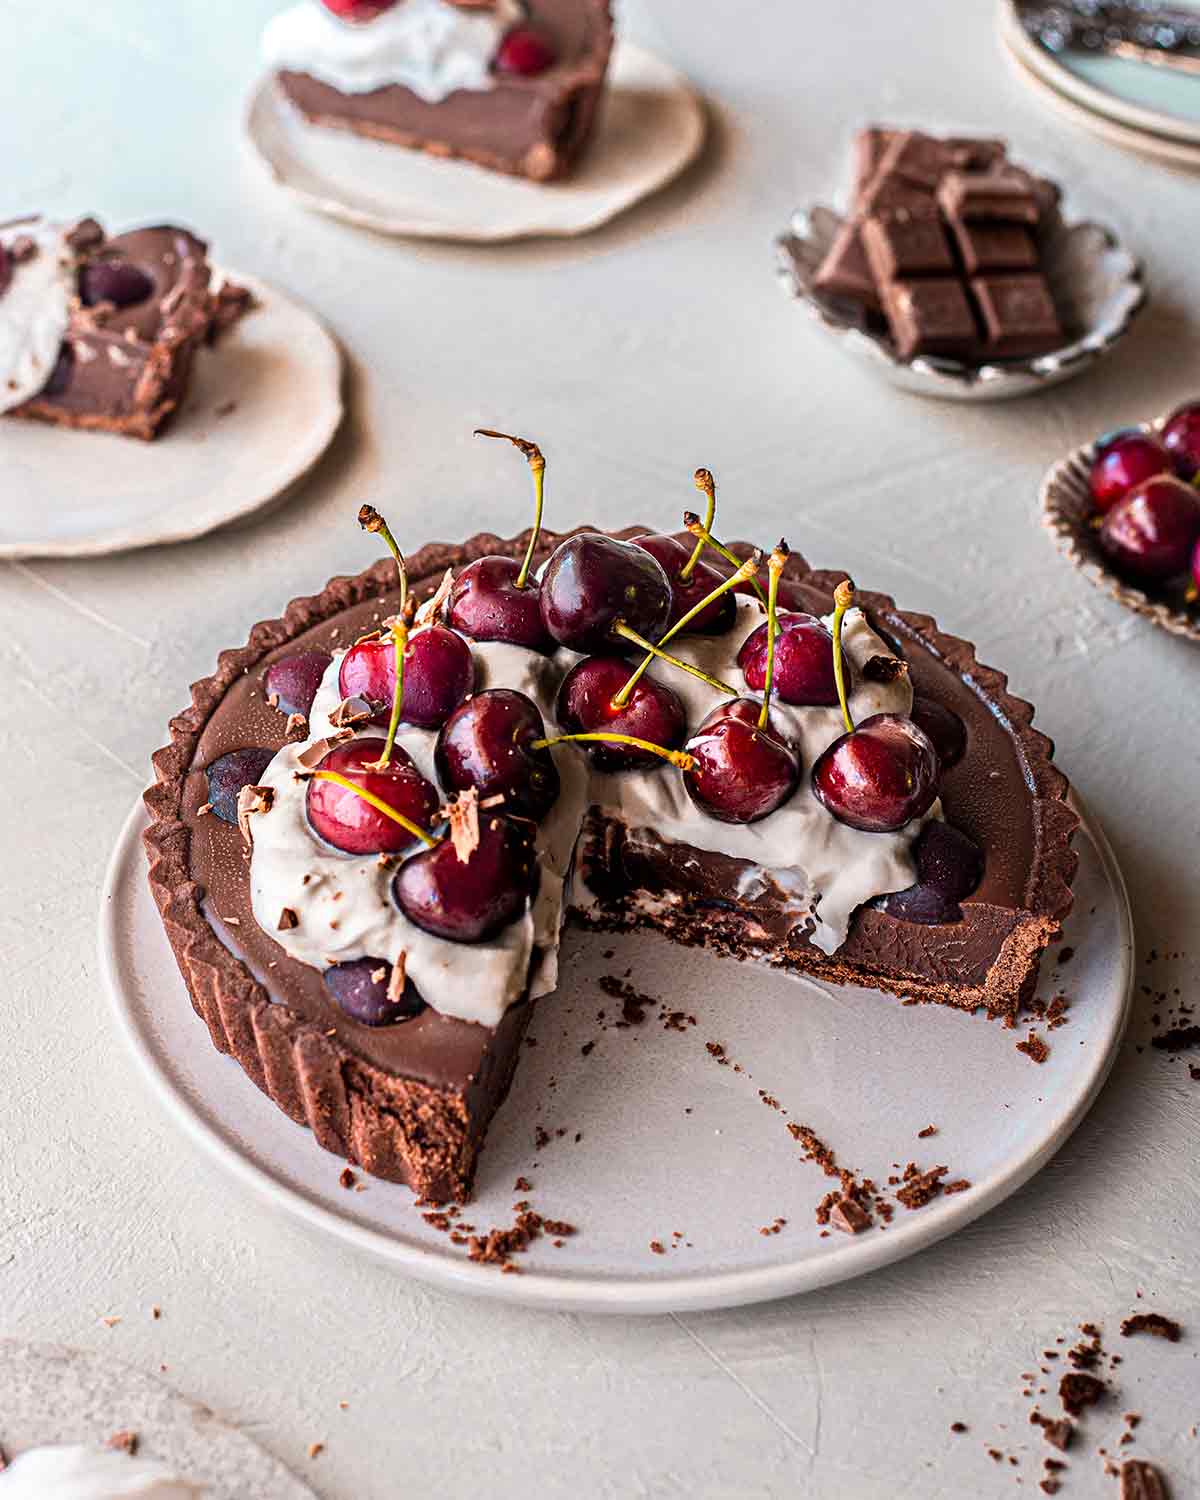 Vegan black forest tart on plate with two slices removed showing creamy texture of the ganache filling.